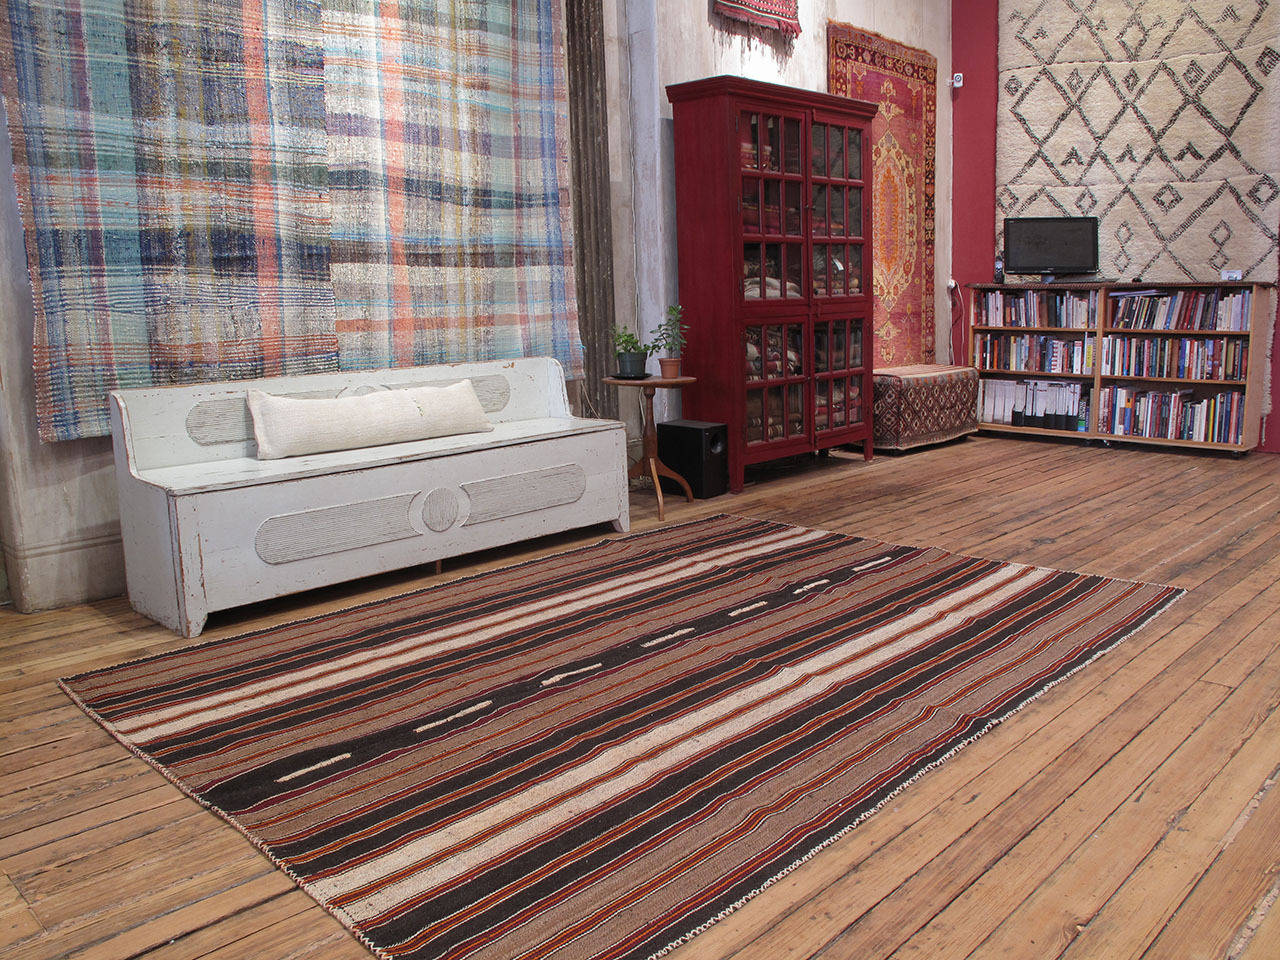 Kilim rug with vertical stripes. A tribal flat-weave from Southeastern Turkey, rug is woven with goat hair in natural tones varying from dark brown to ivory and bright red and orange stripes. A Kilim rug like this would have been used as a